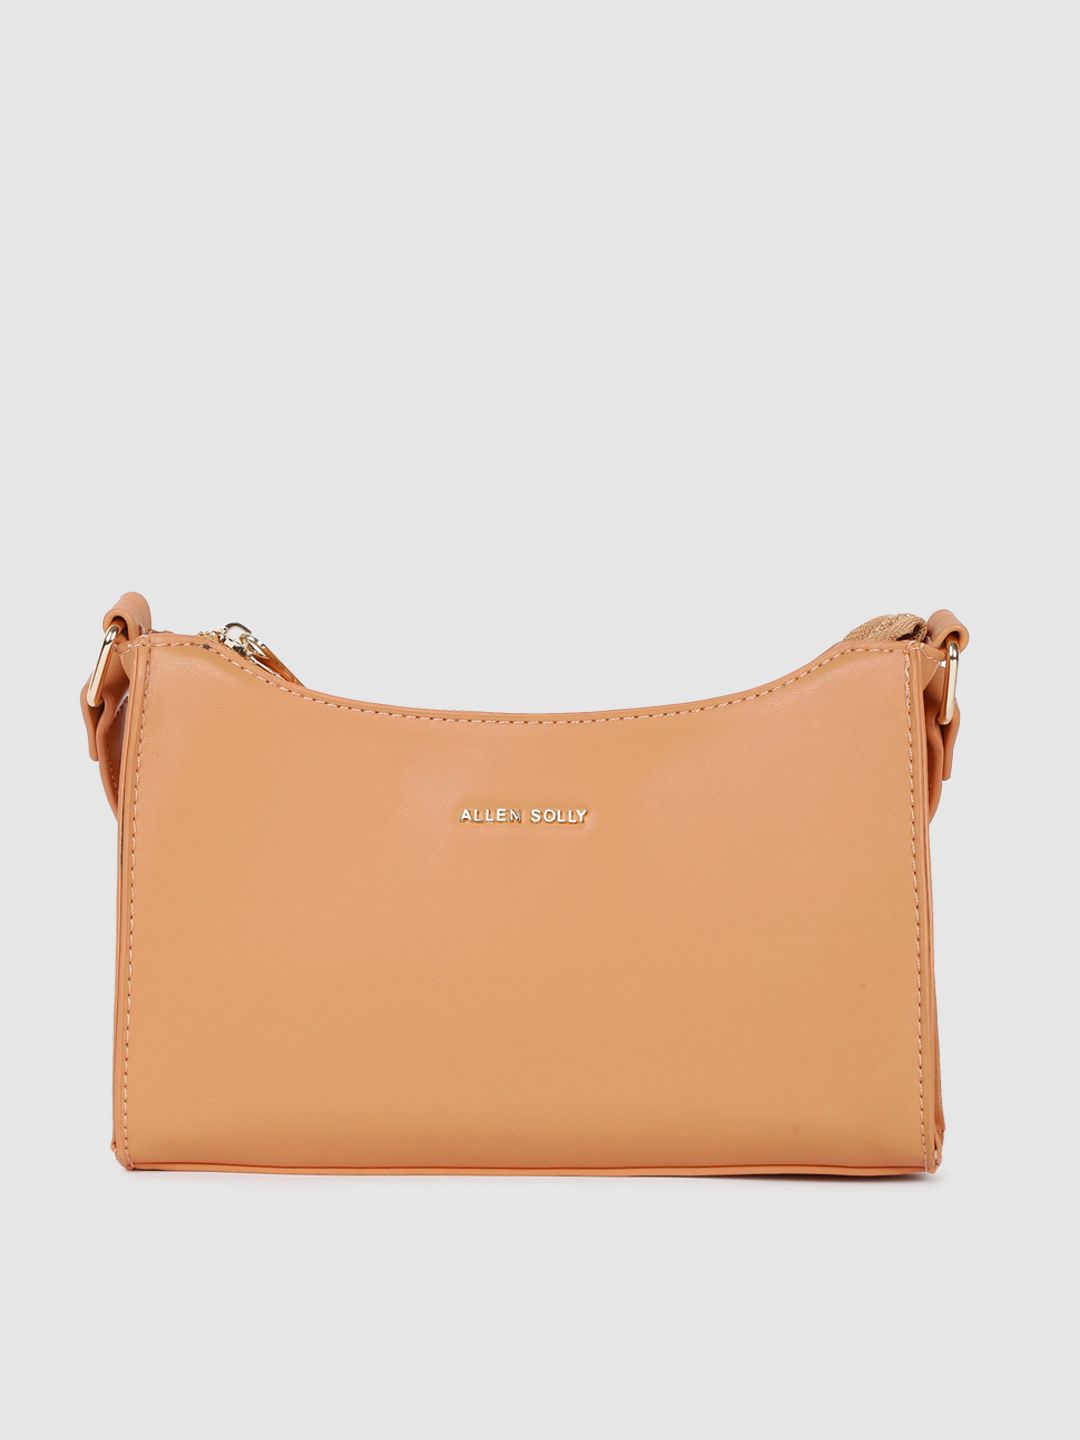 Allen Solly Tan Brown Solid Structured Sling Bag Price in India